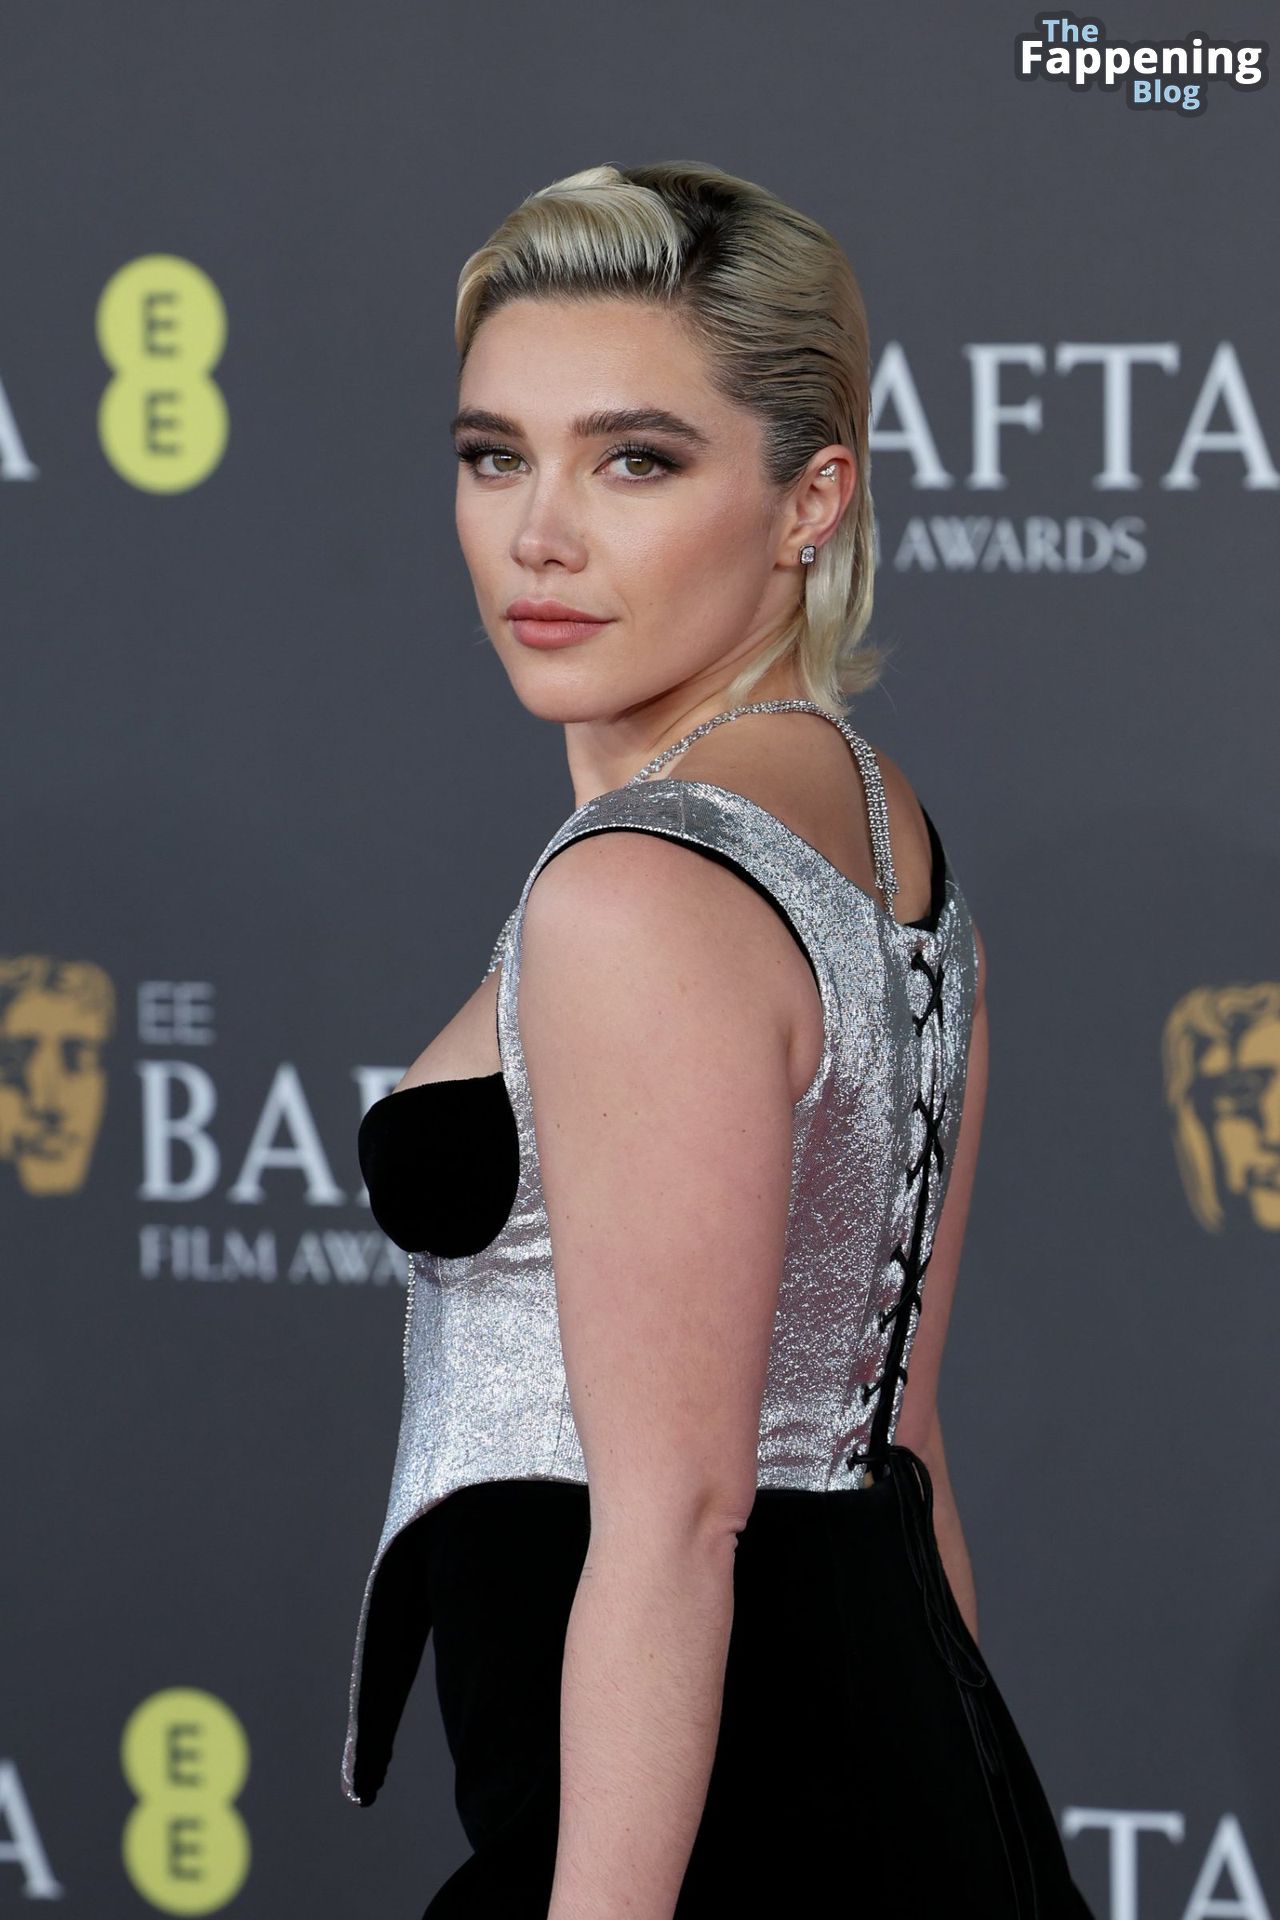 Florence-Pugh-Sexy-4-The-Fappening-Blog-2.jpg